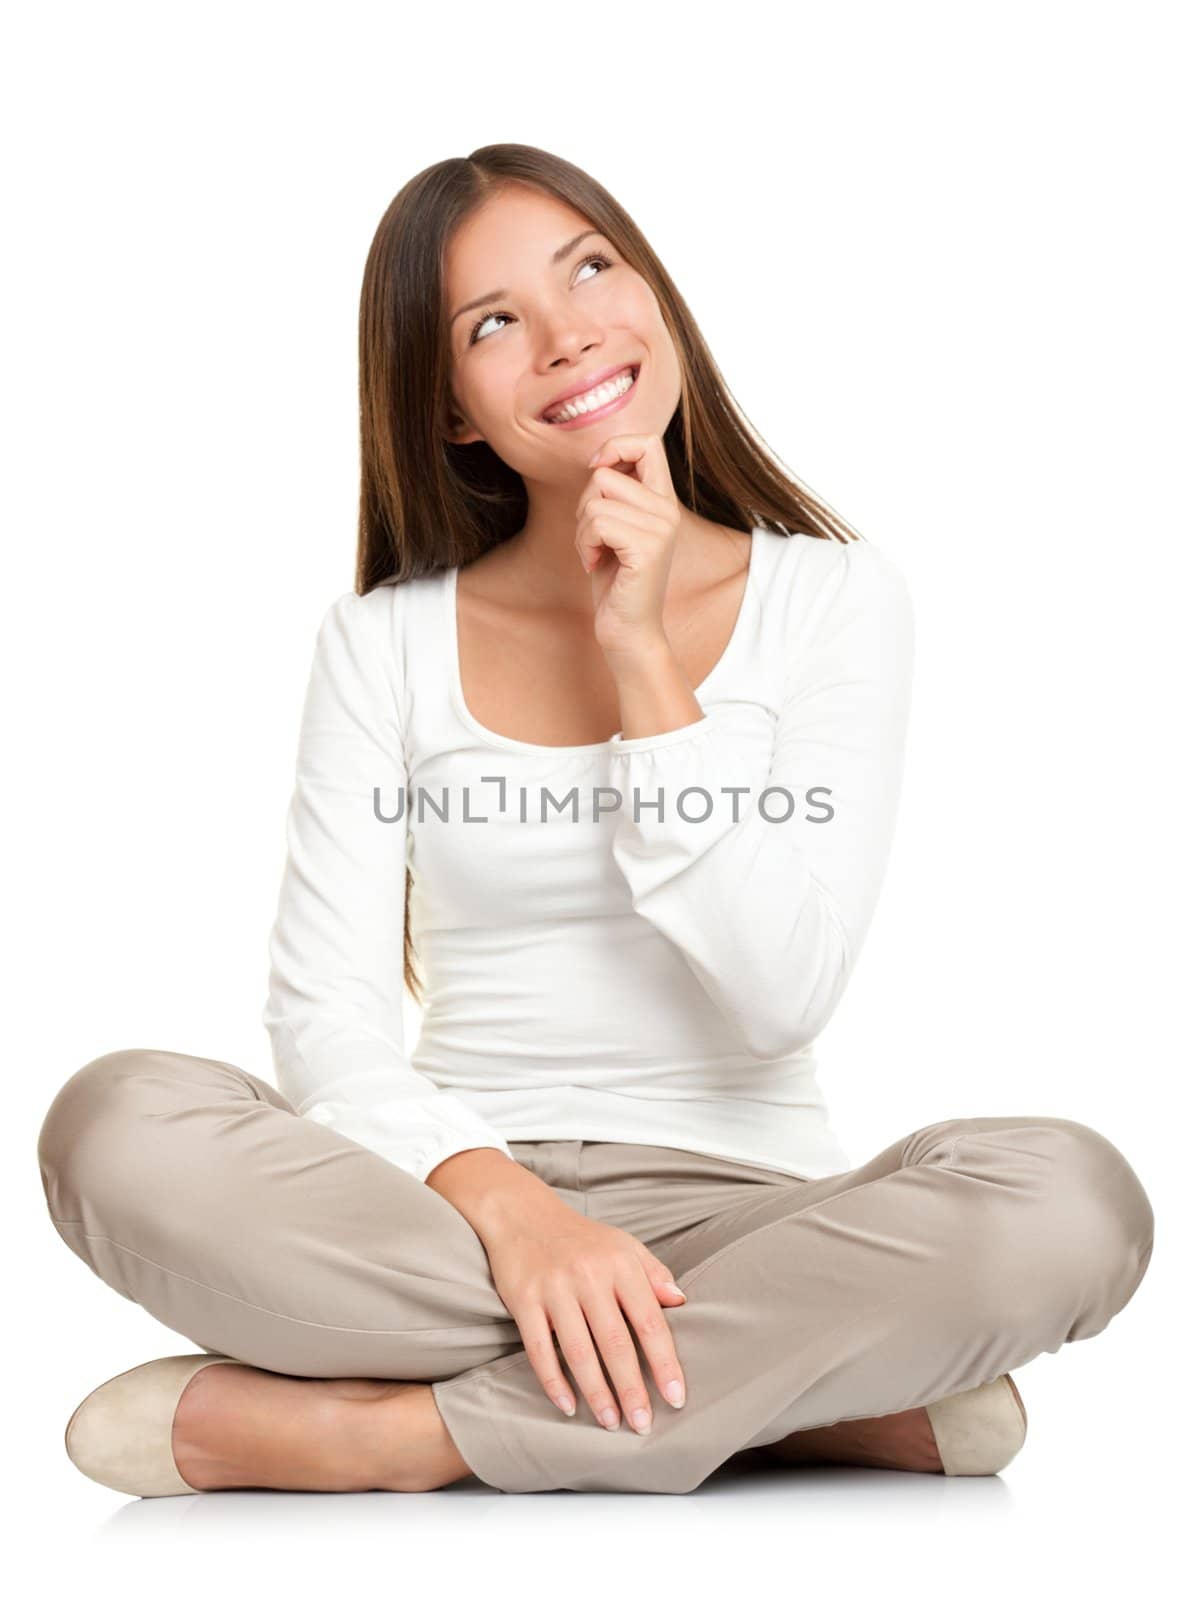 Thinking woman sitting on floor isolated on white background. Beautiful young mixed race Caucasian / Asian female model smiling looking up.